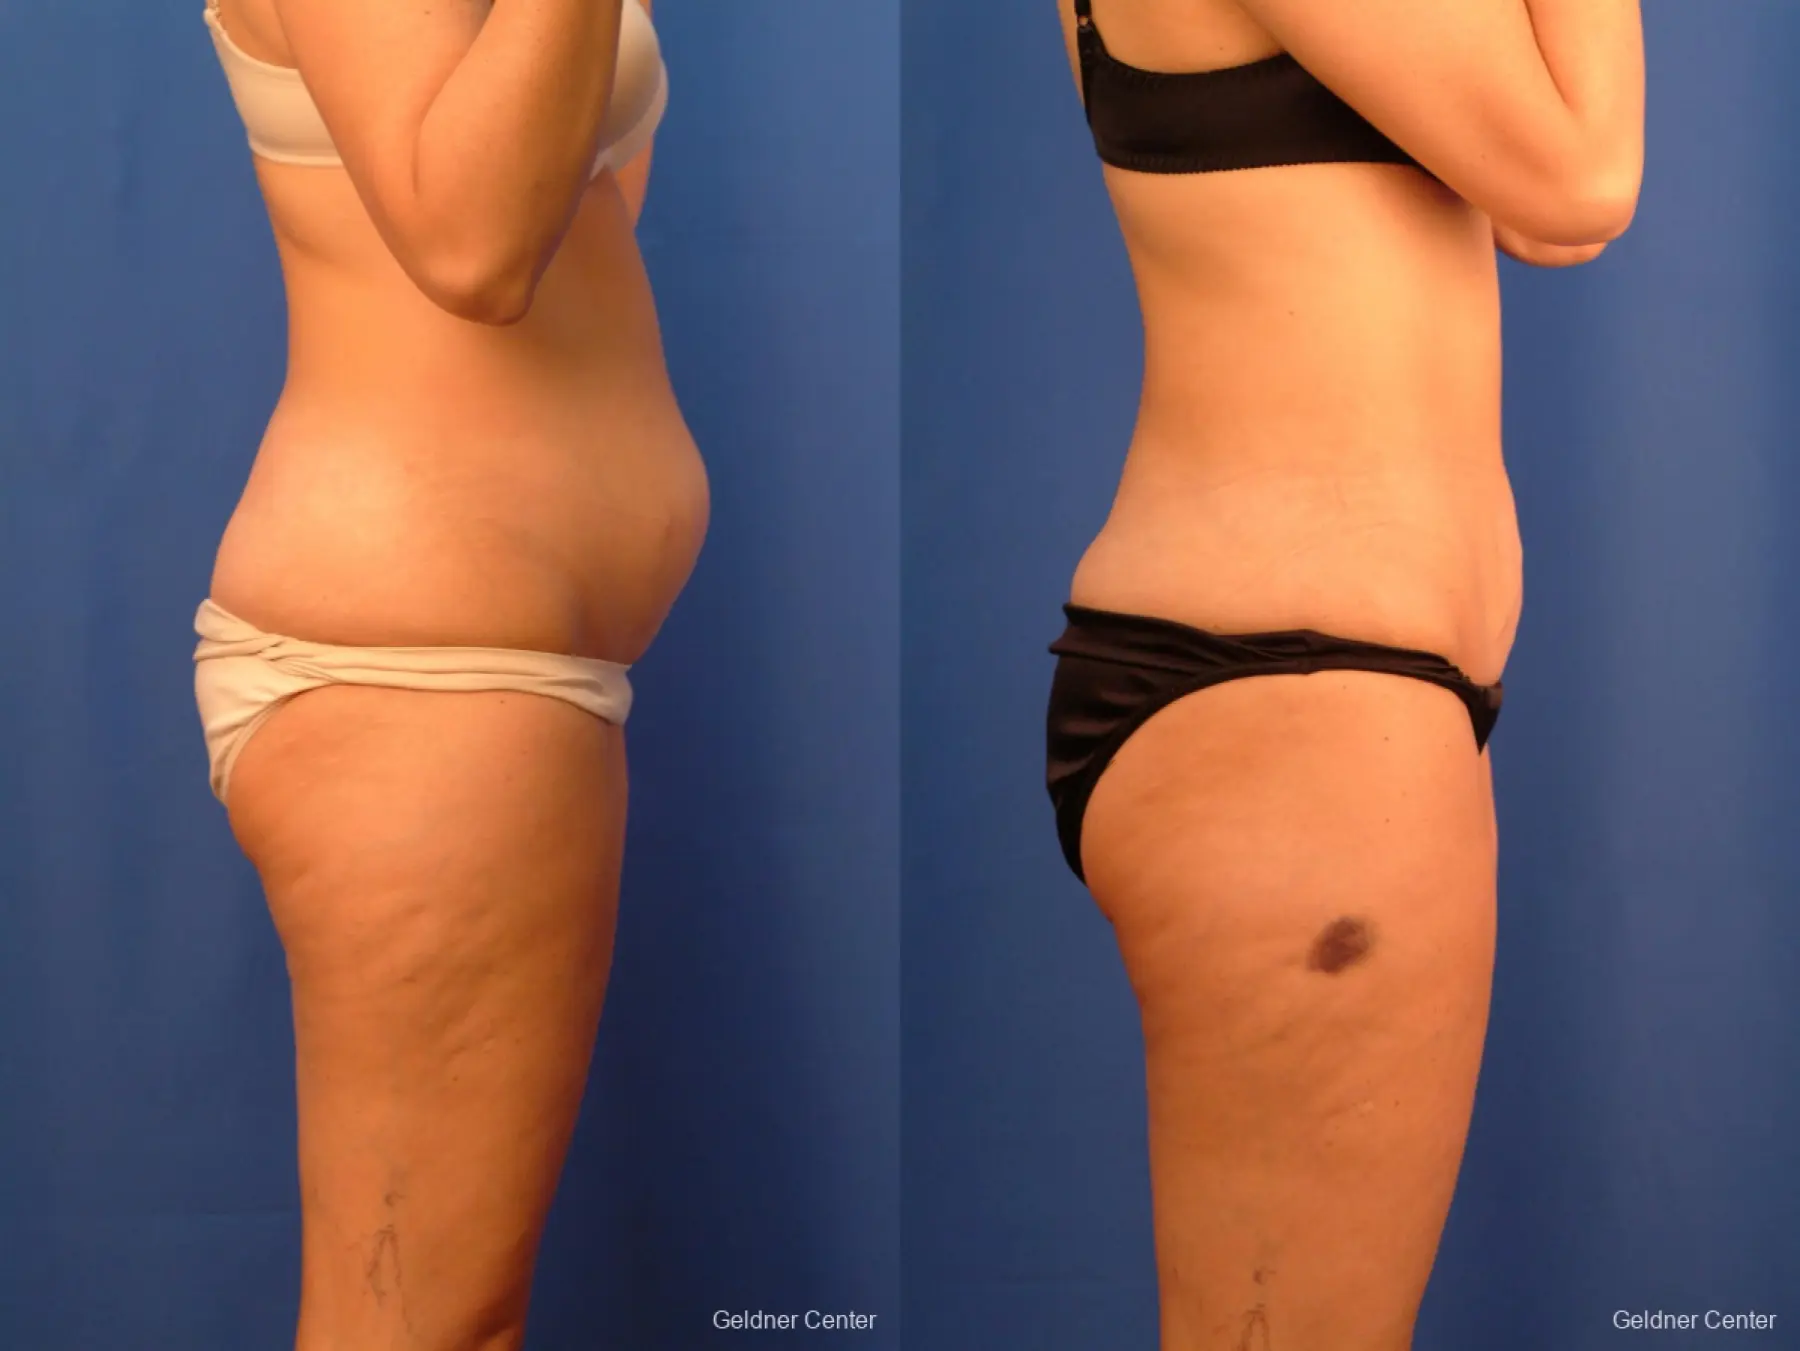 Vaser lipo patient 2520 before and after photos - Before and After 2